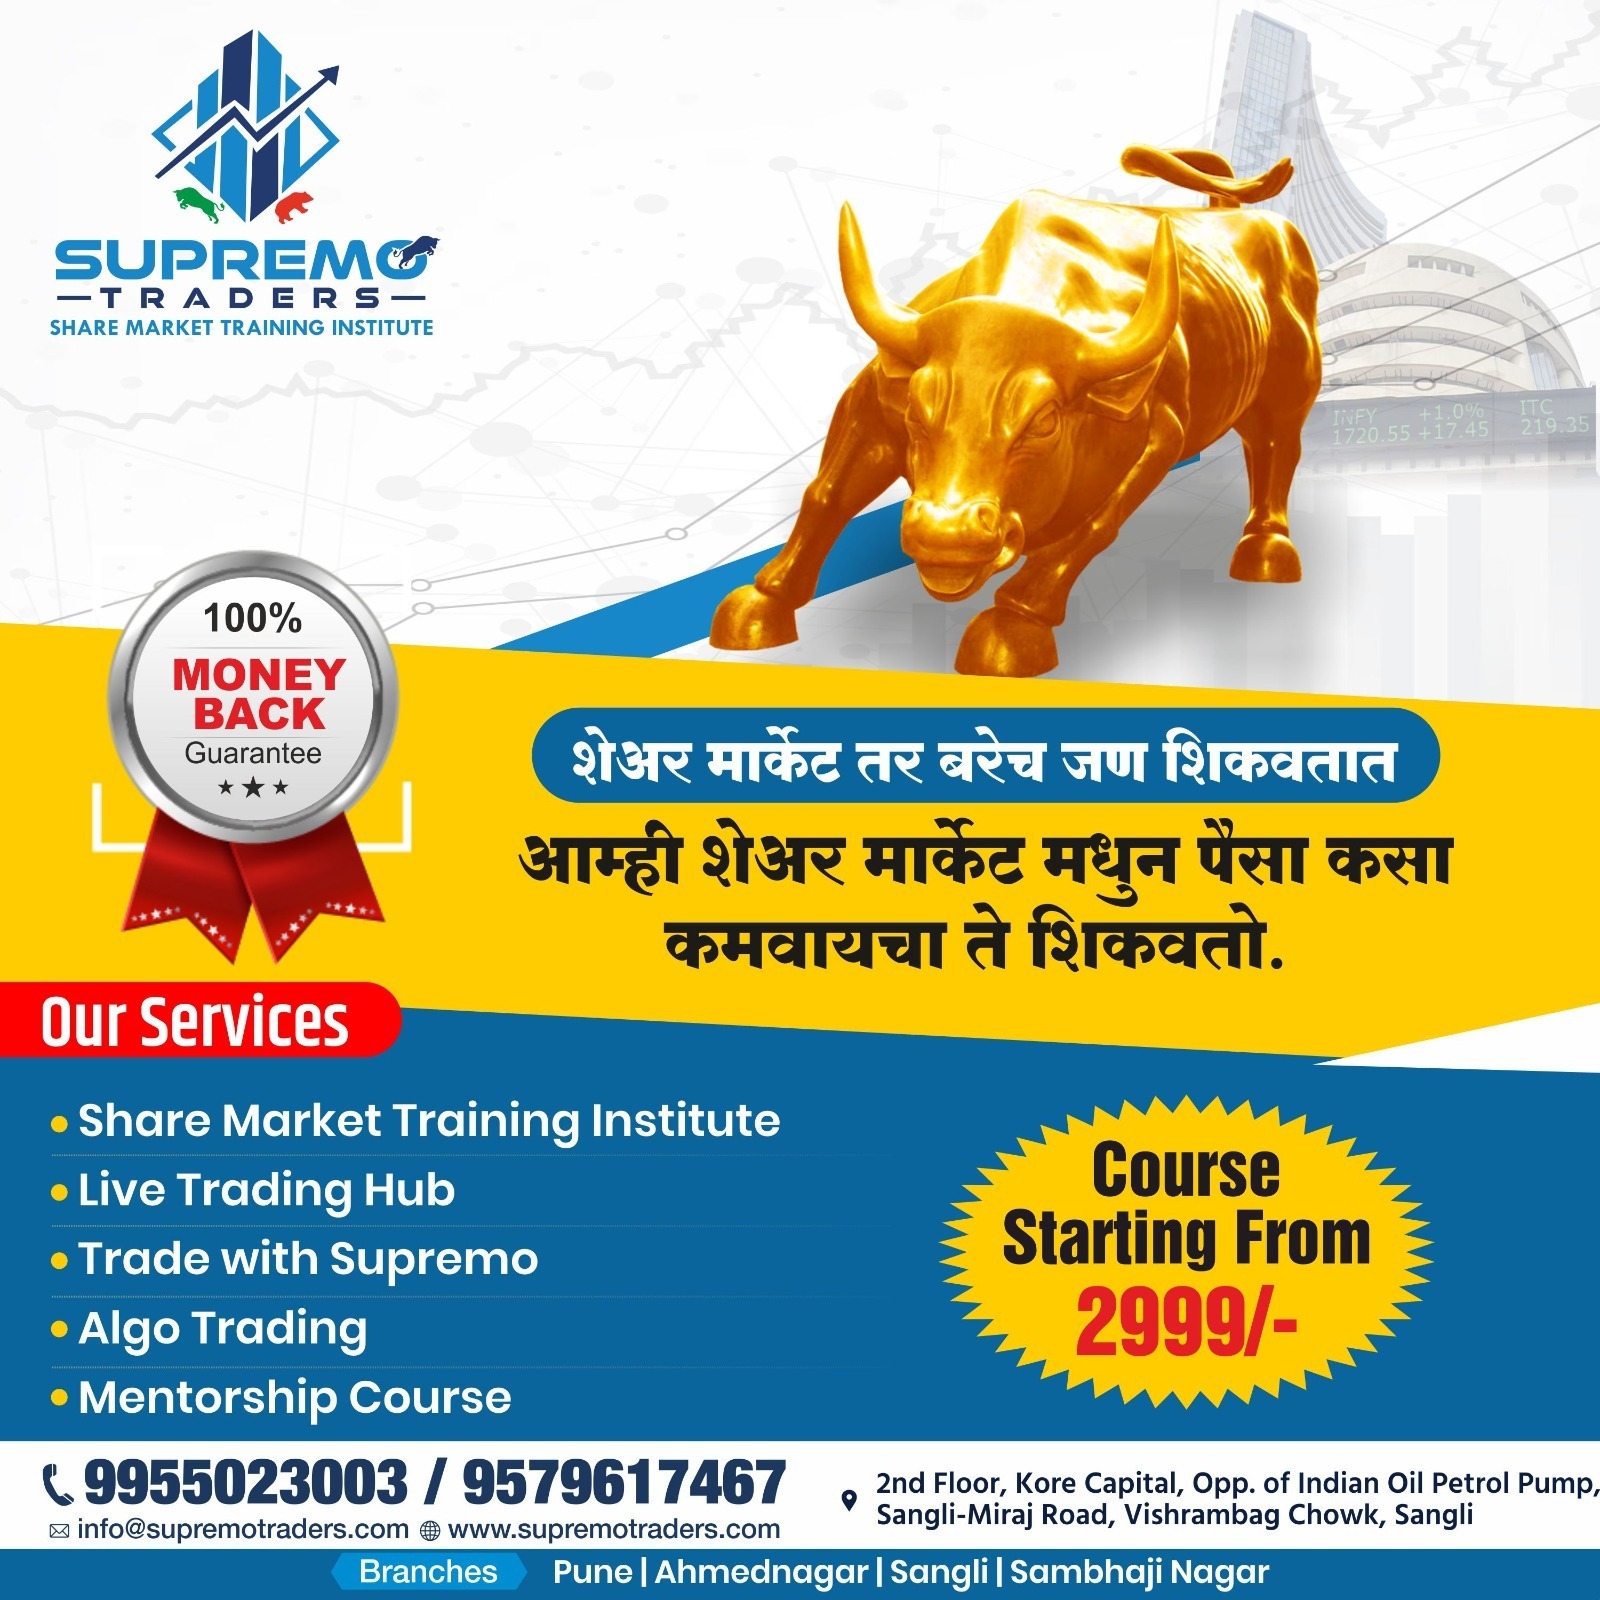 Share Market Course Start From At Just 2999/- in Pune